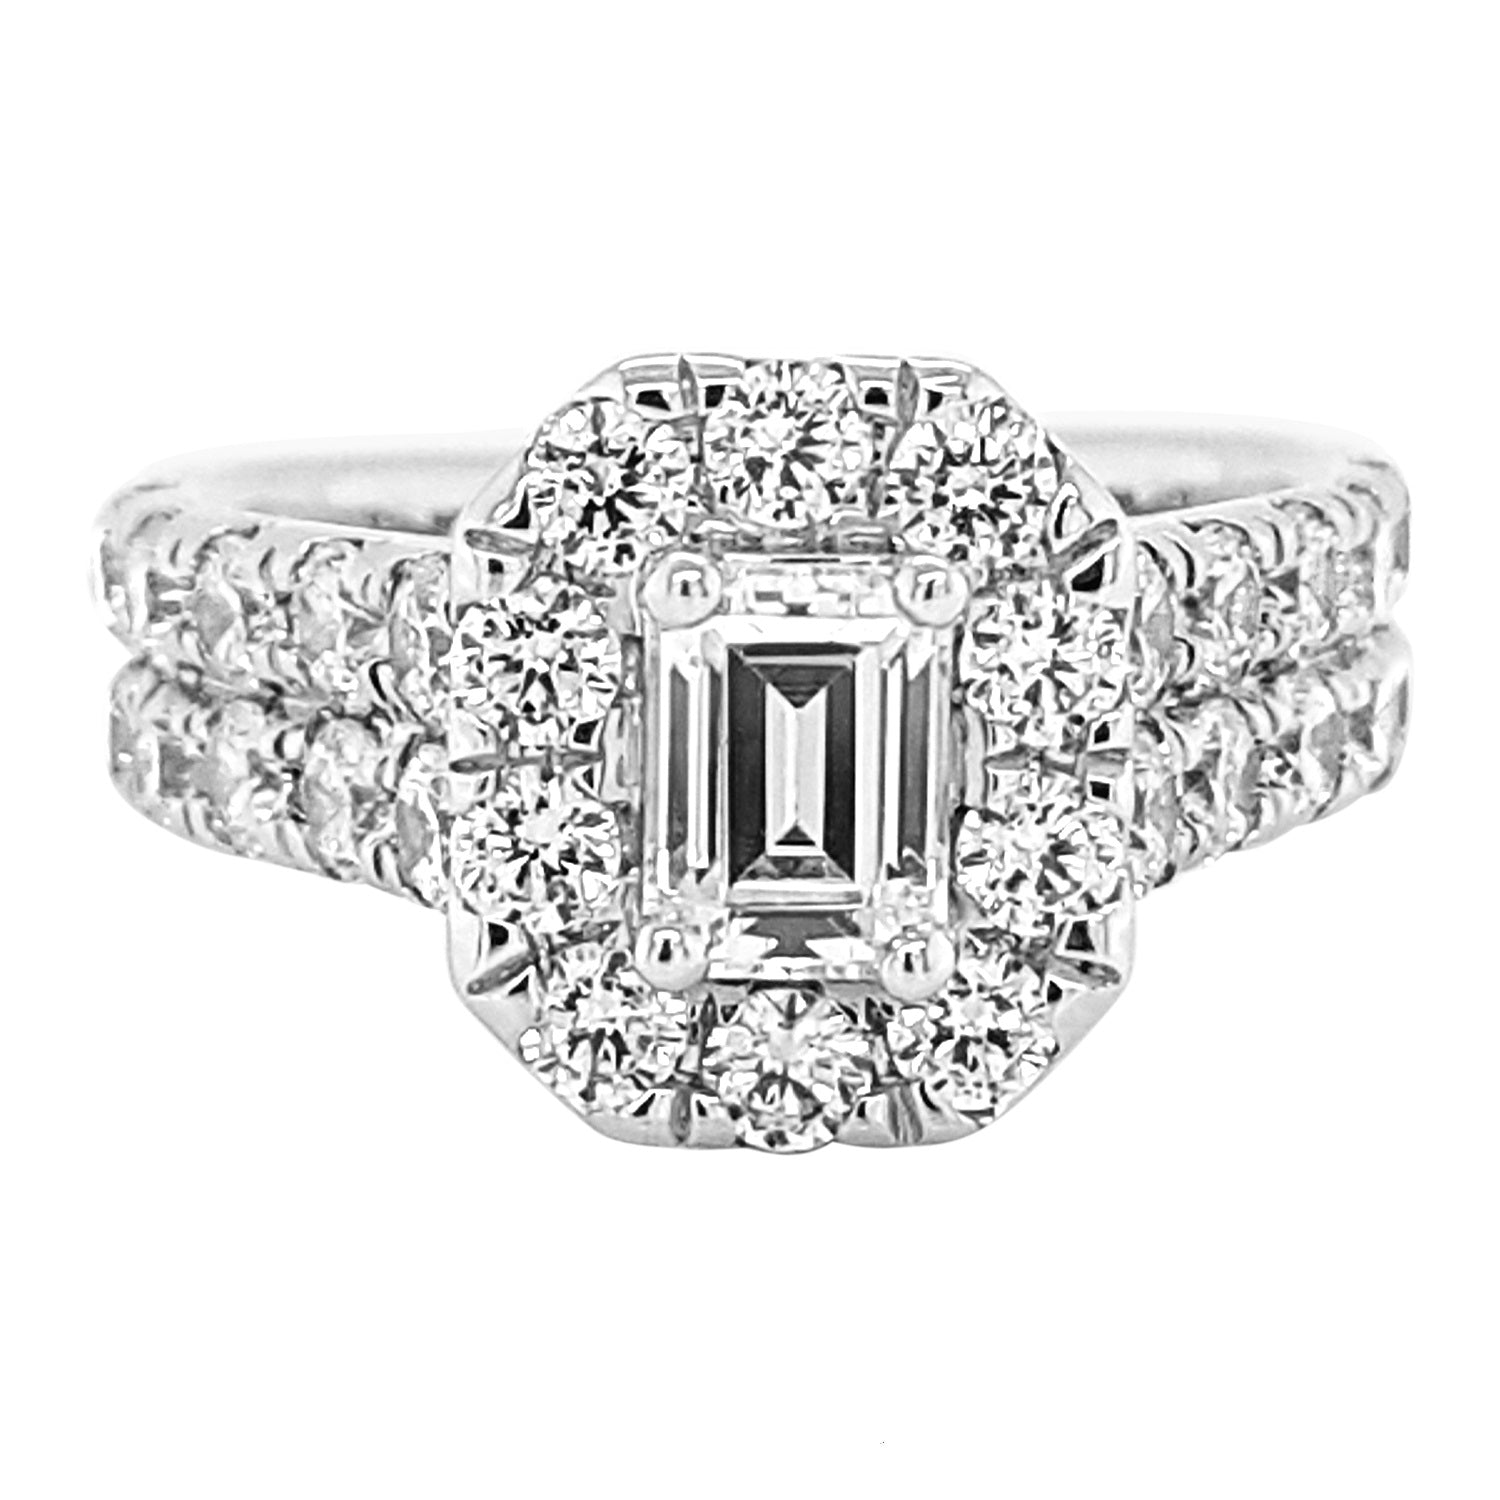 Bold Bridal Diamond Engagement Ring made in 14k White gold-Emerald